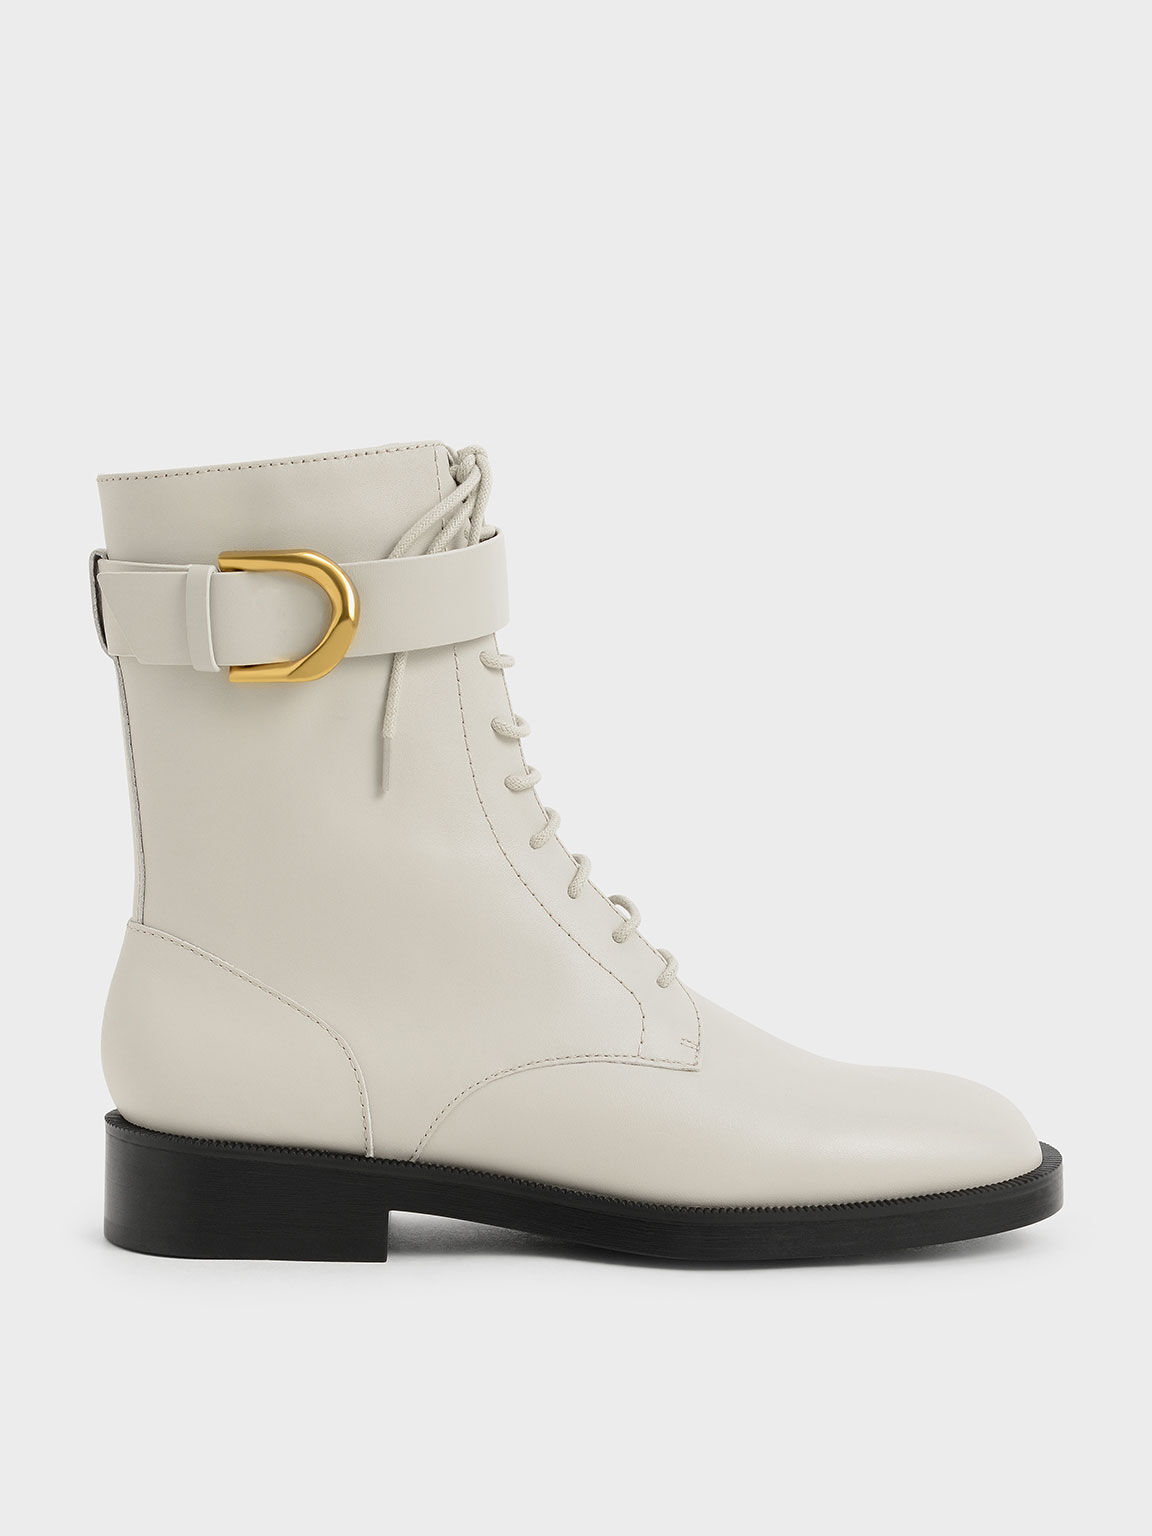 Charles & Keith Gabine Buckled Leather Ankle Boots​